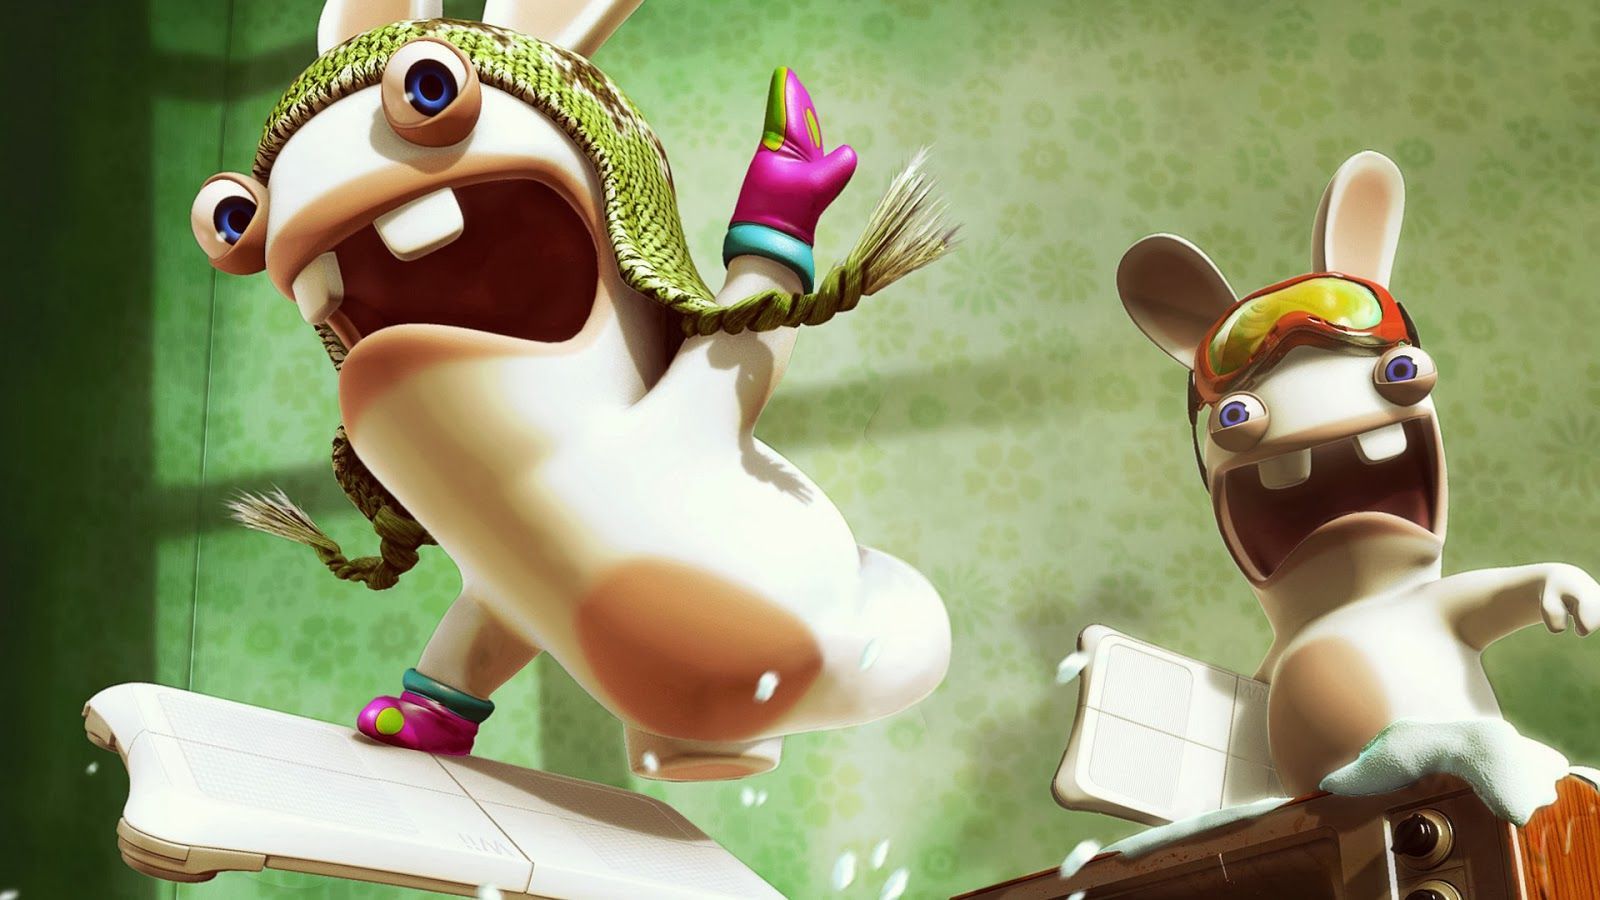 Funny Rayman Rabbids Wallpaper. Funny cartoon image, Weird picture